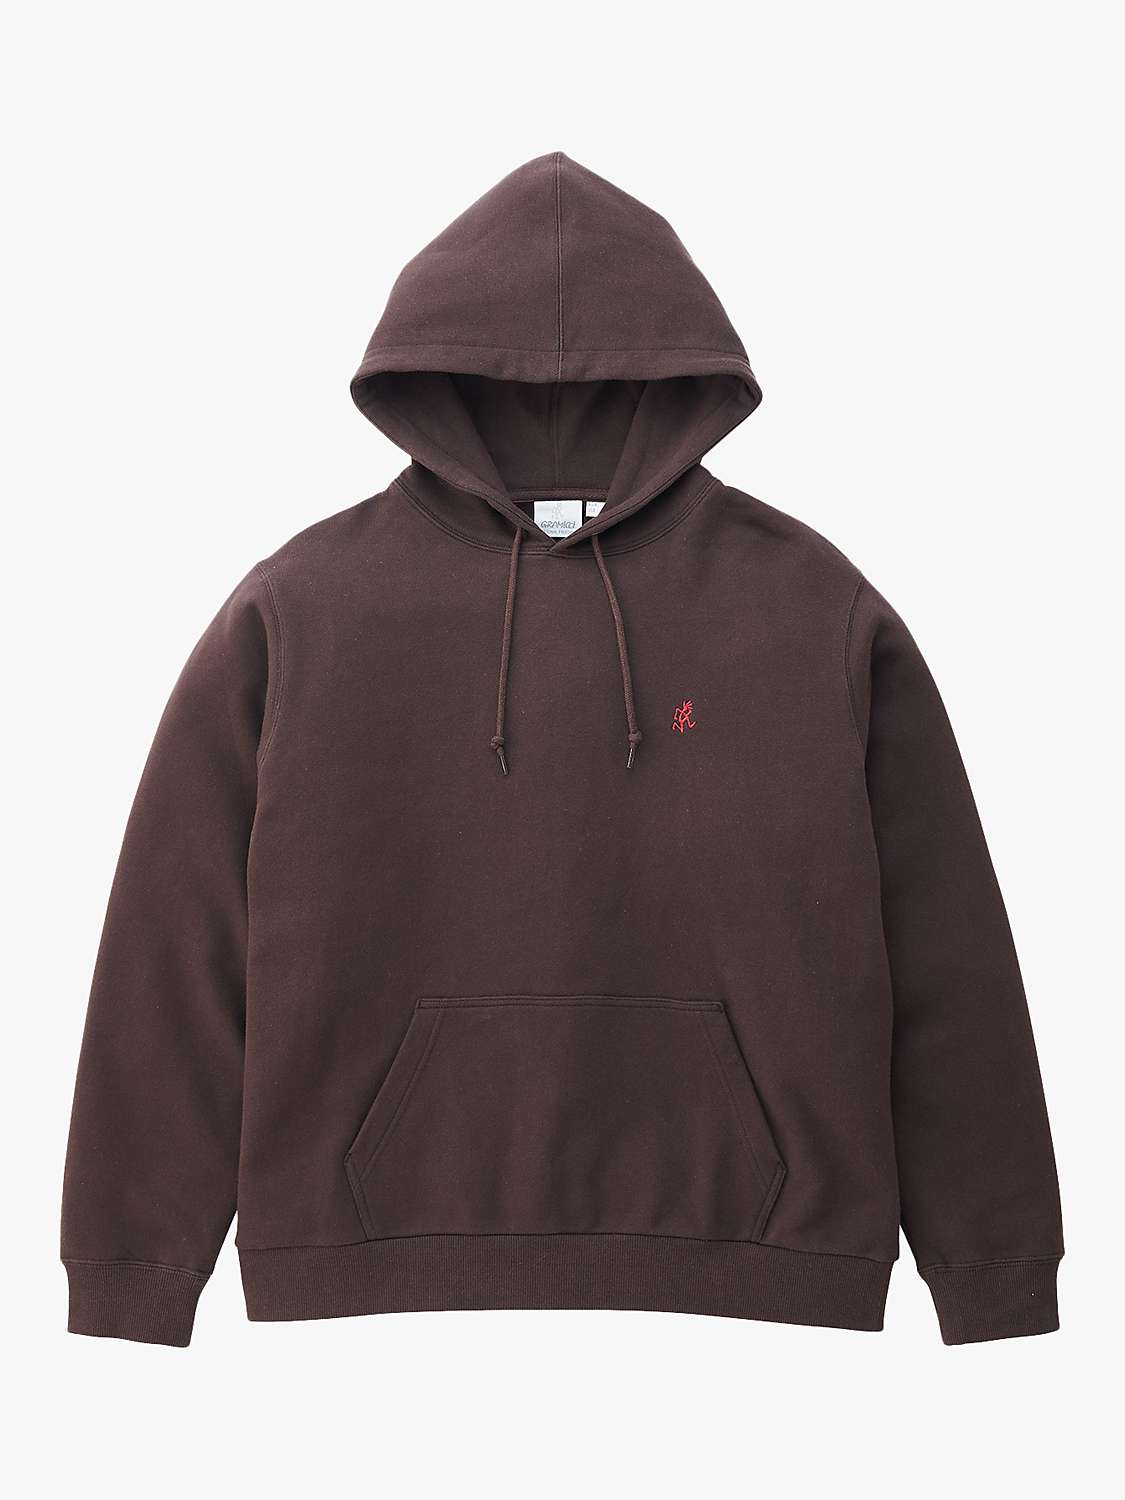 Buy Gramicci One Point Cotton Hoodie, Deep Brown Online at johnlewis.com